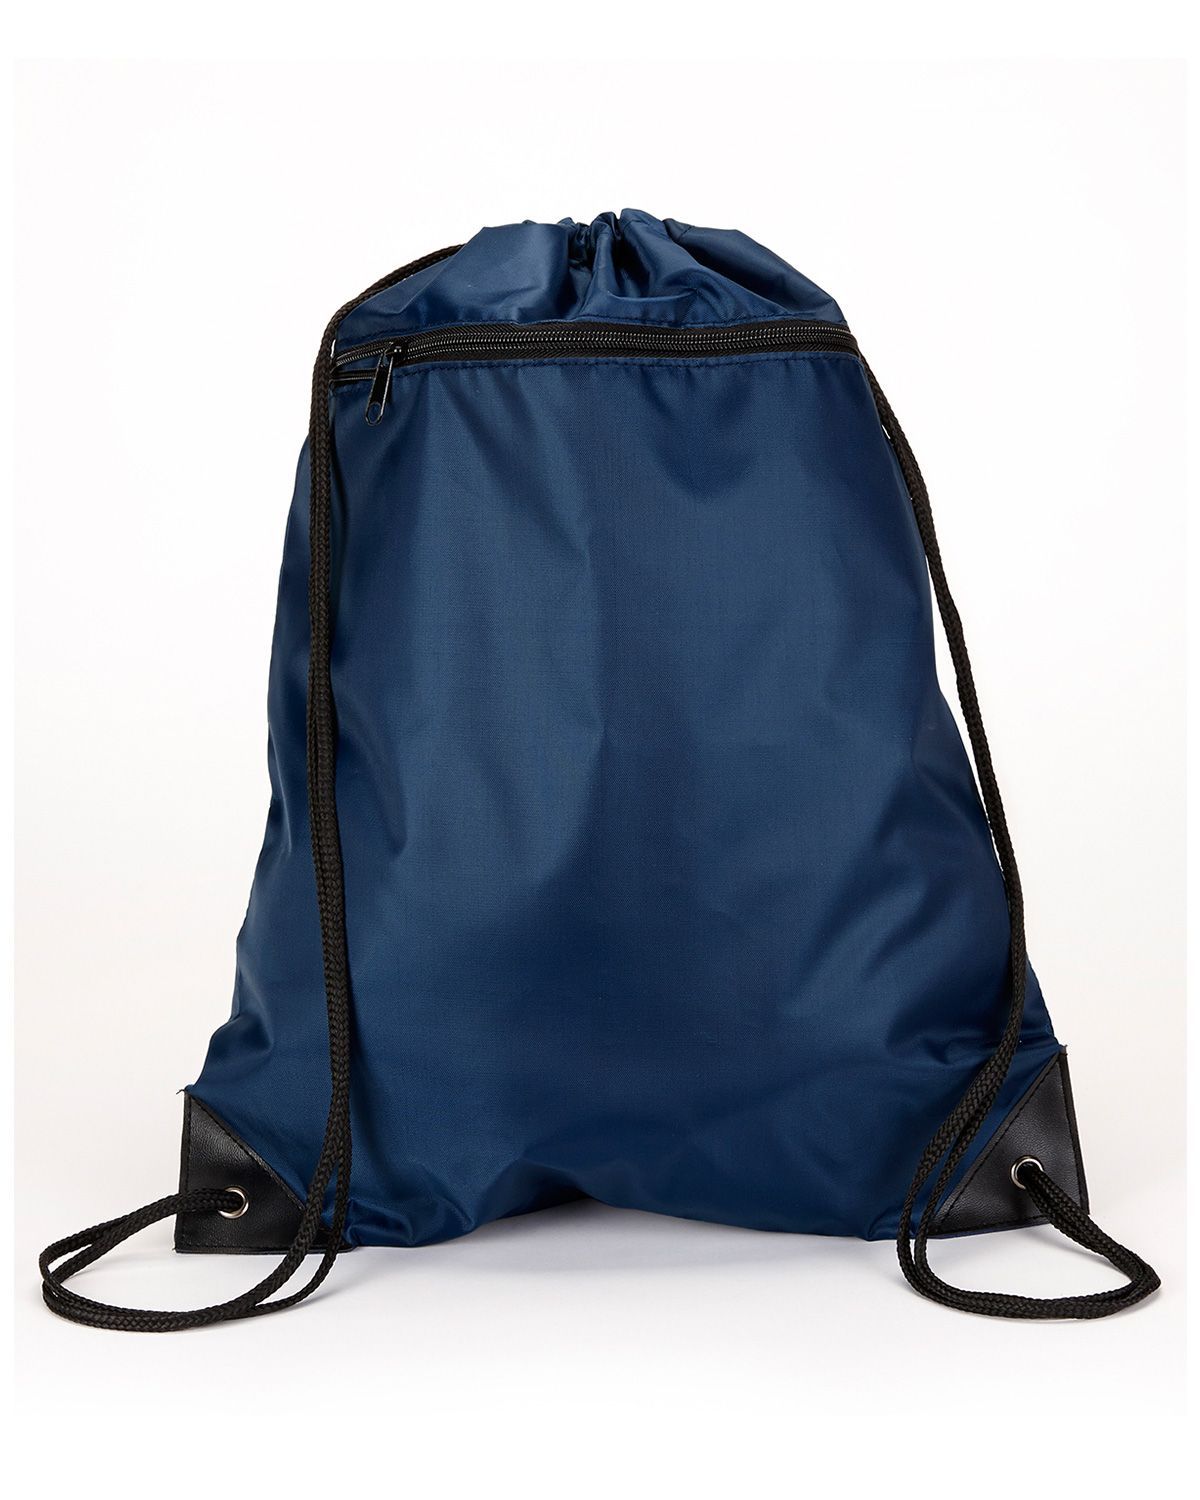 Reviews about Liberty Bags 8888 Zippered Drawstring Backpack